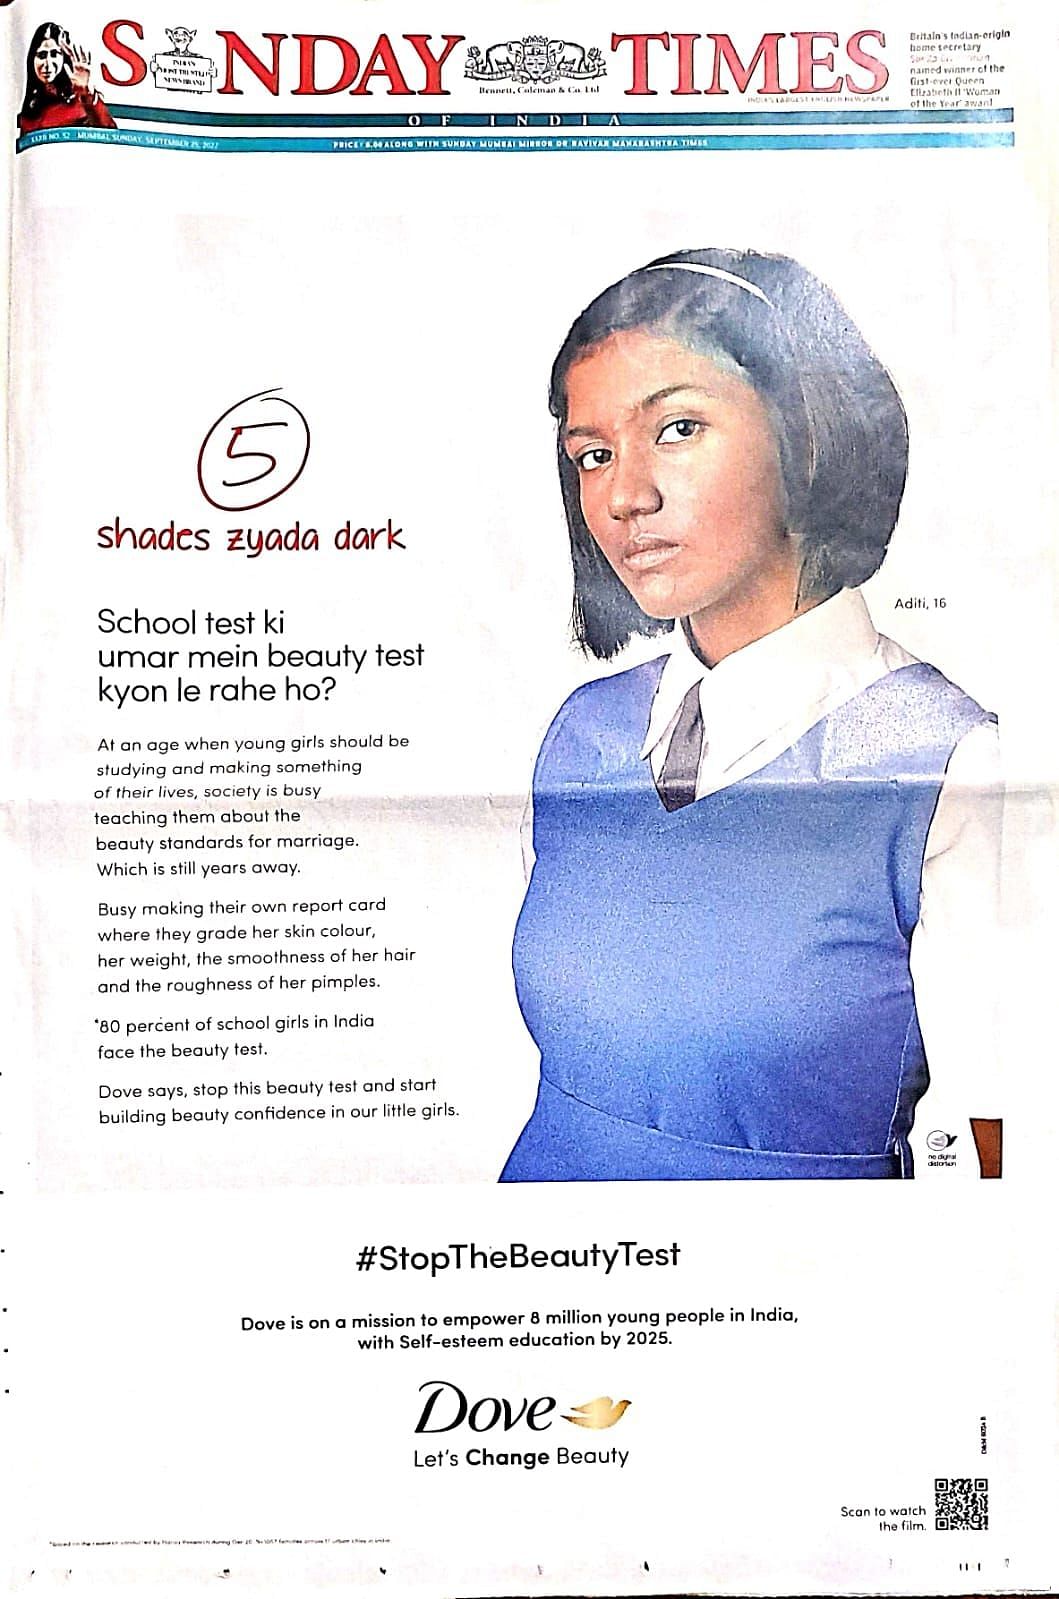 Dove's full page ads as seen in Sunday Times